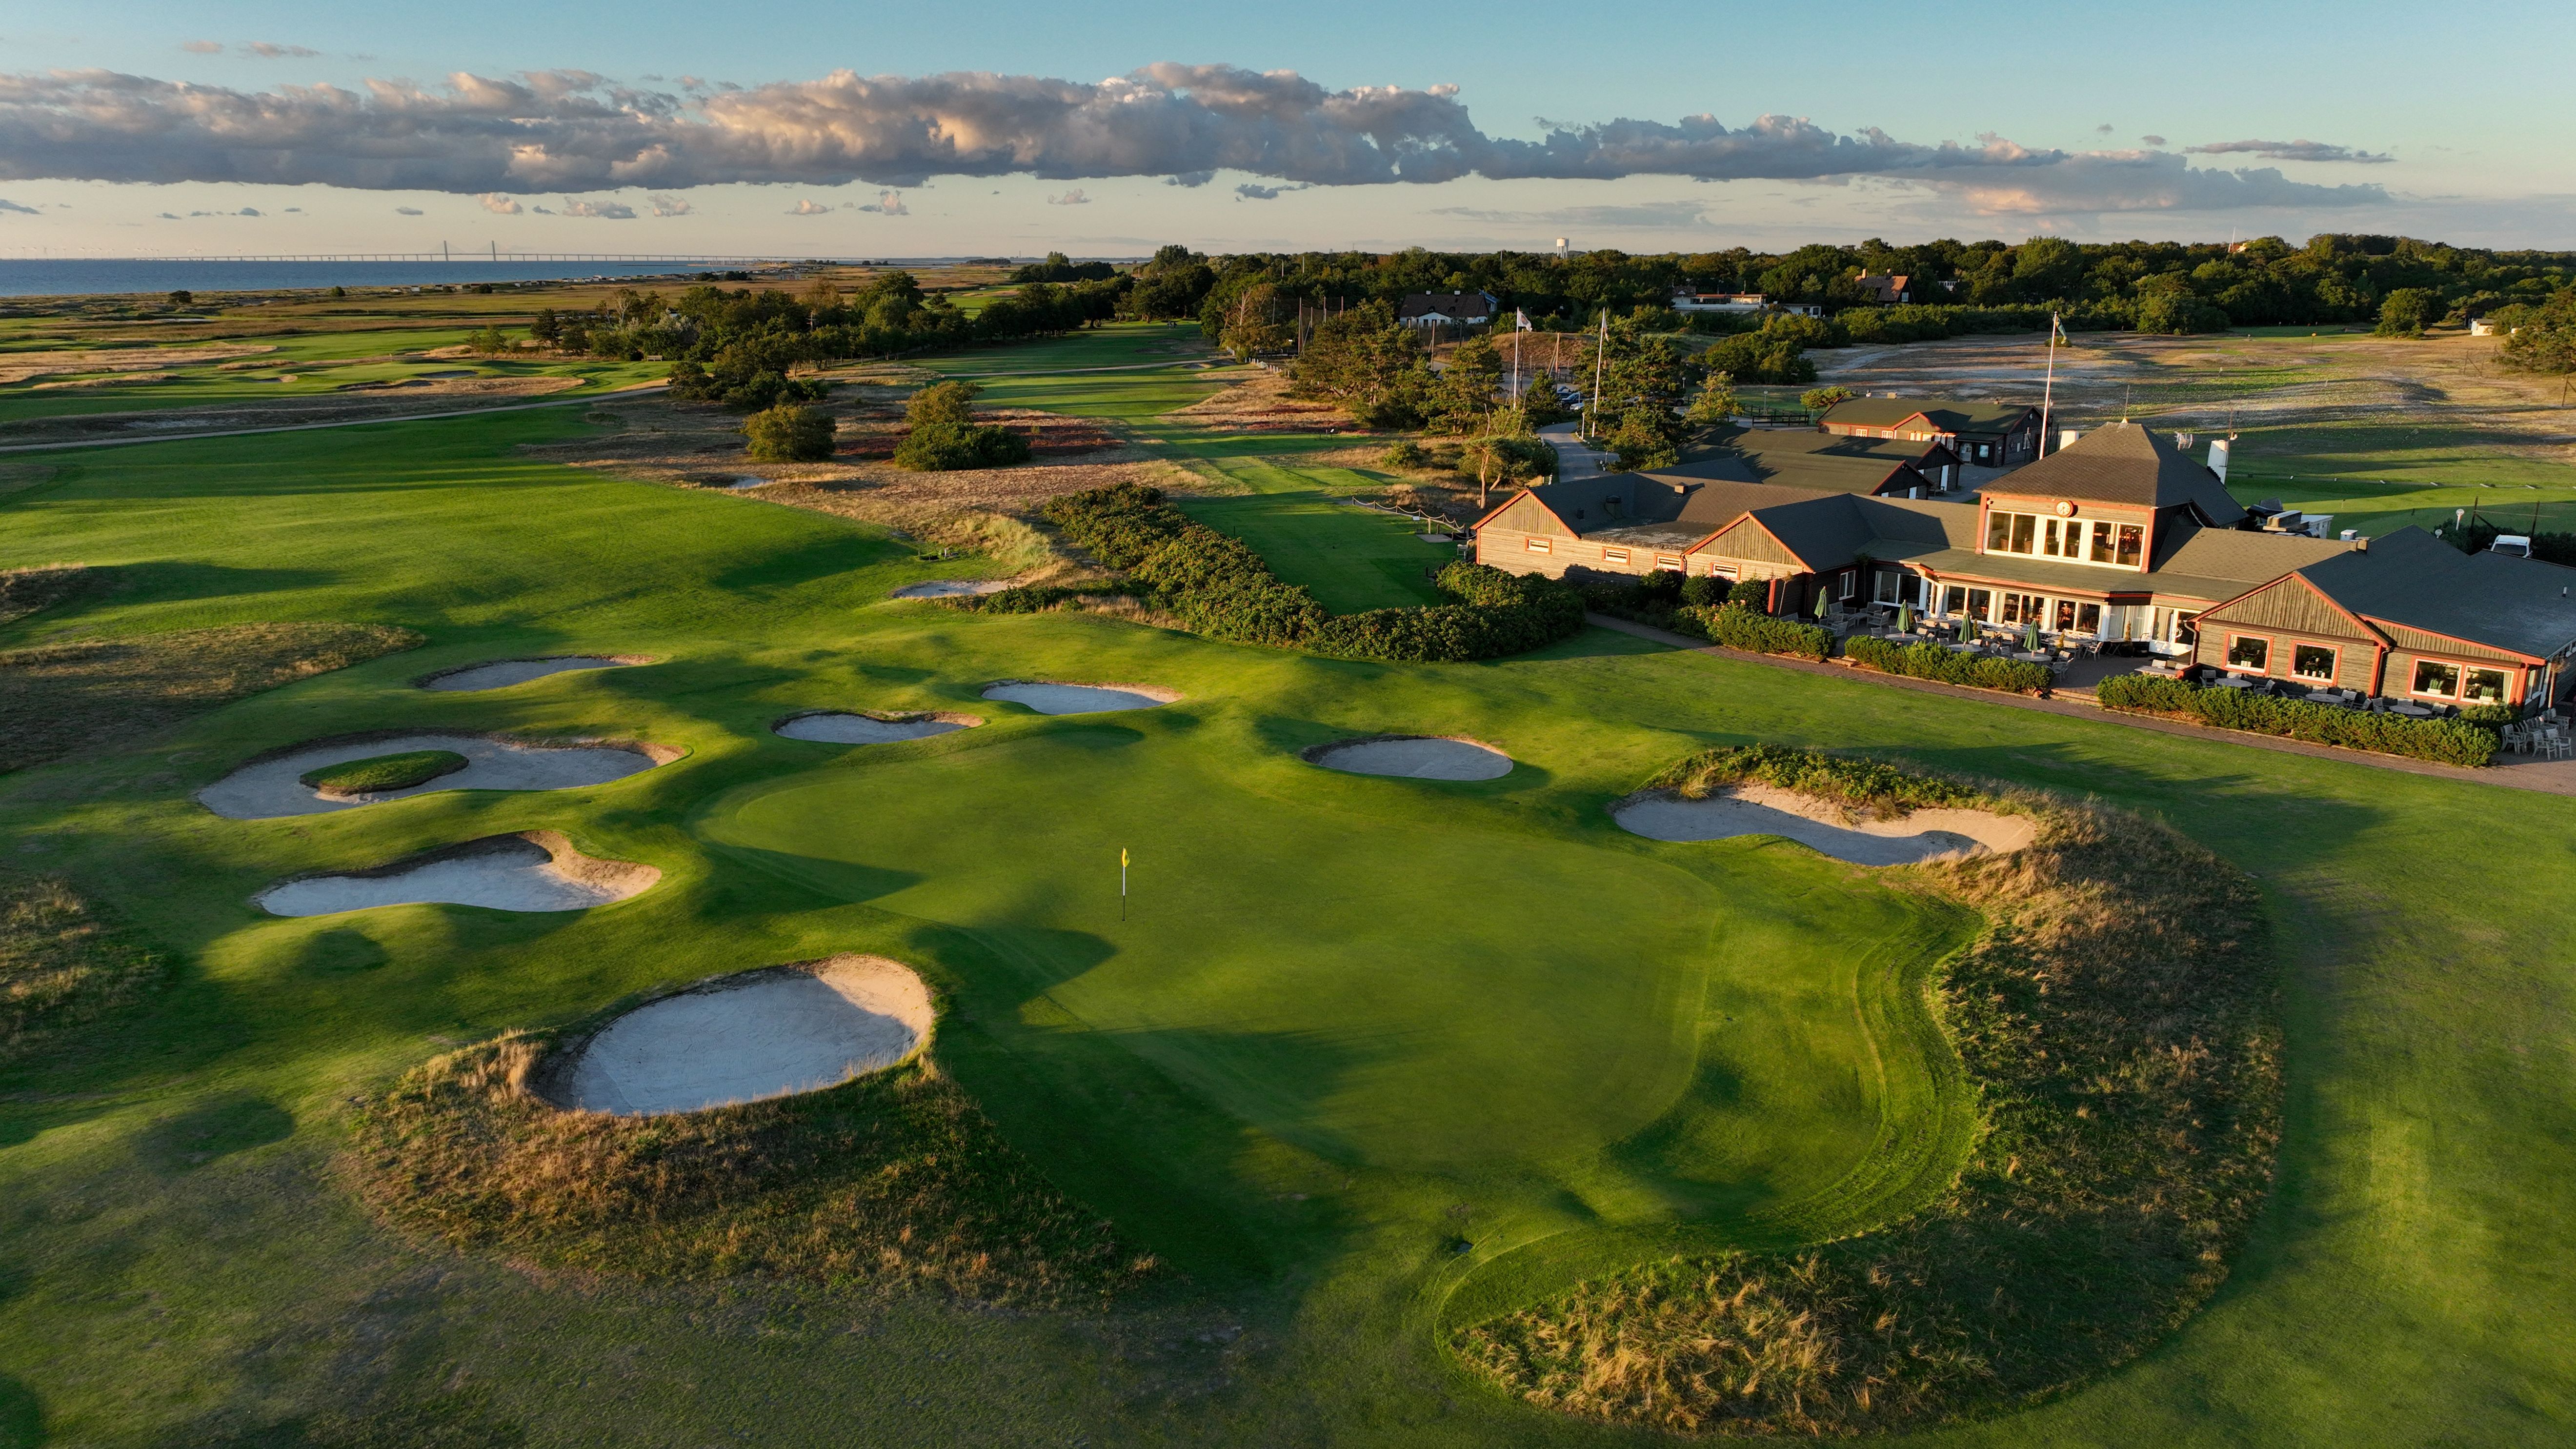 Falsterbo Golfklubb - Top 100 Golf Courses of Sweden Top 100 Golf Courses